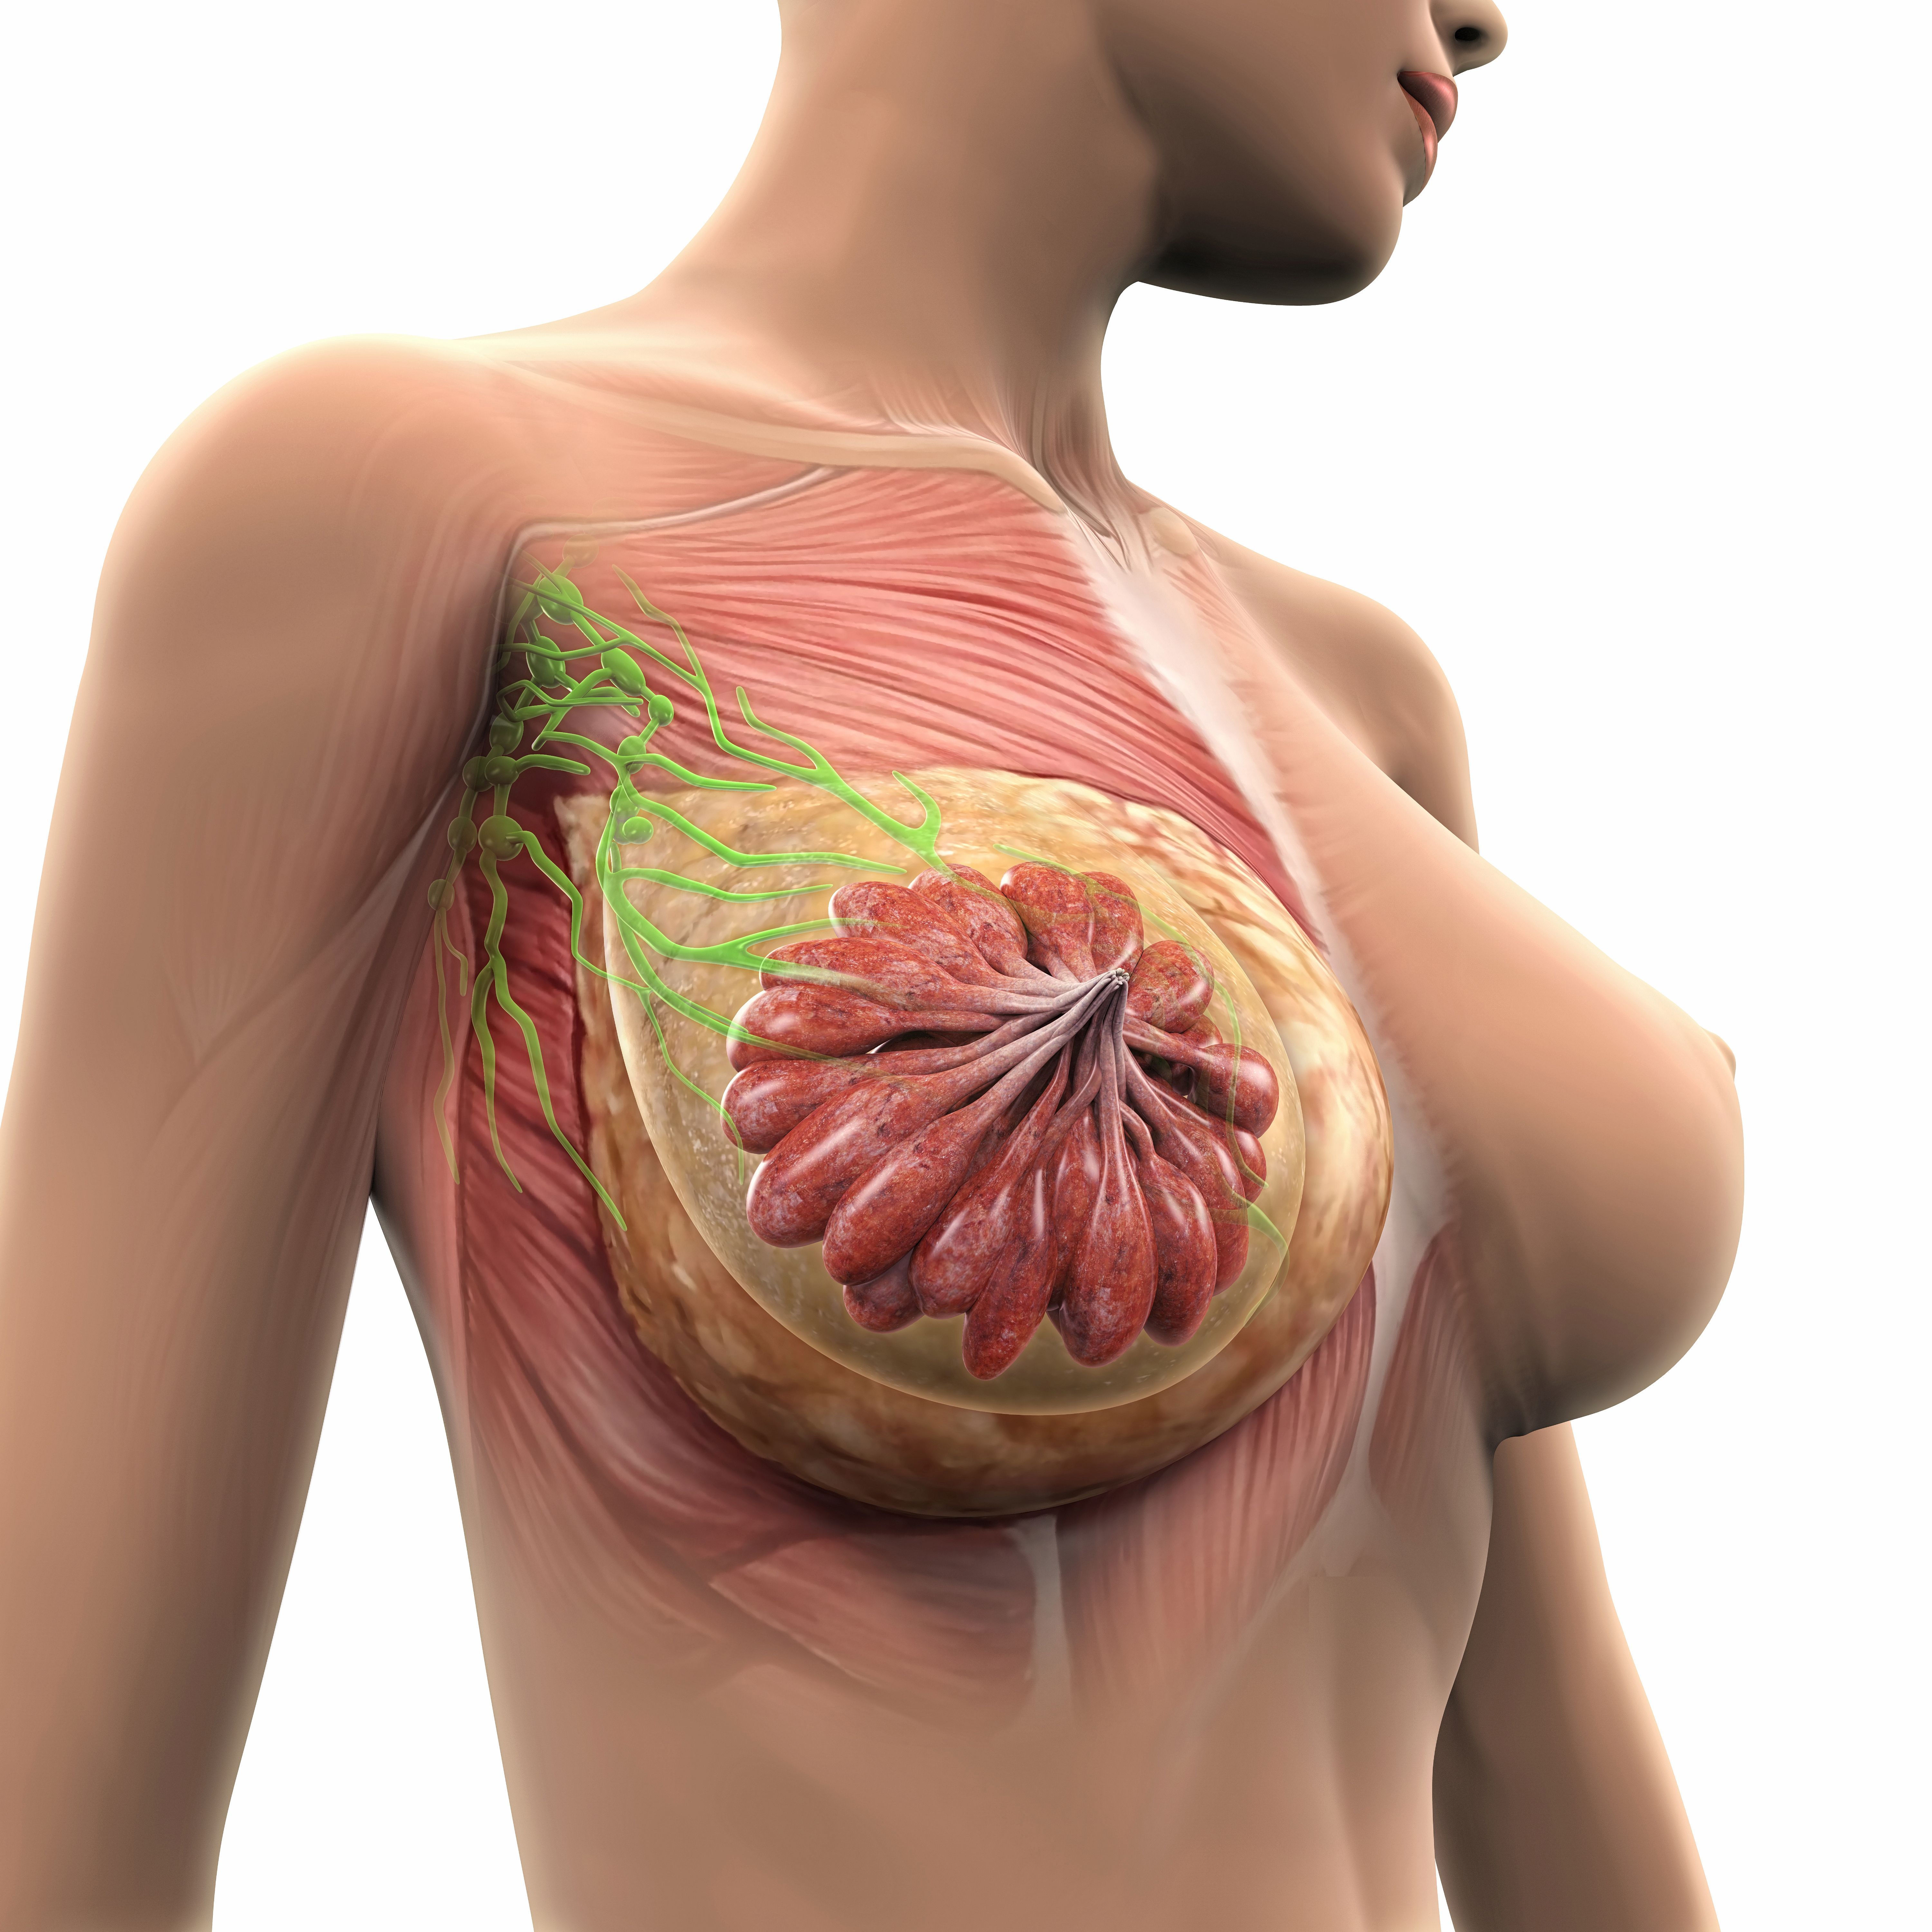 Approval Alert | <b>Trastuzumab Deruxtecan for HER2-Positive Breast Cancer</b>